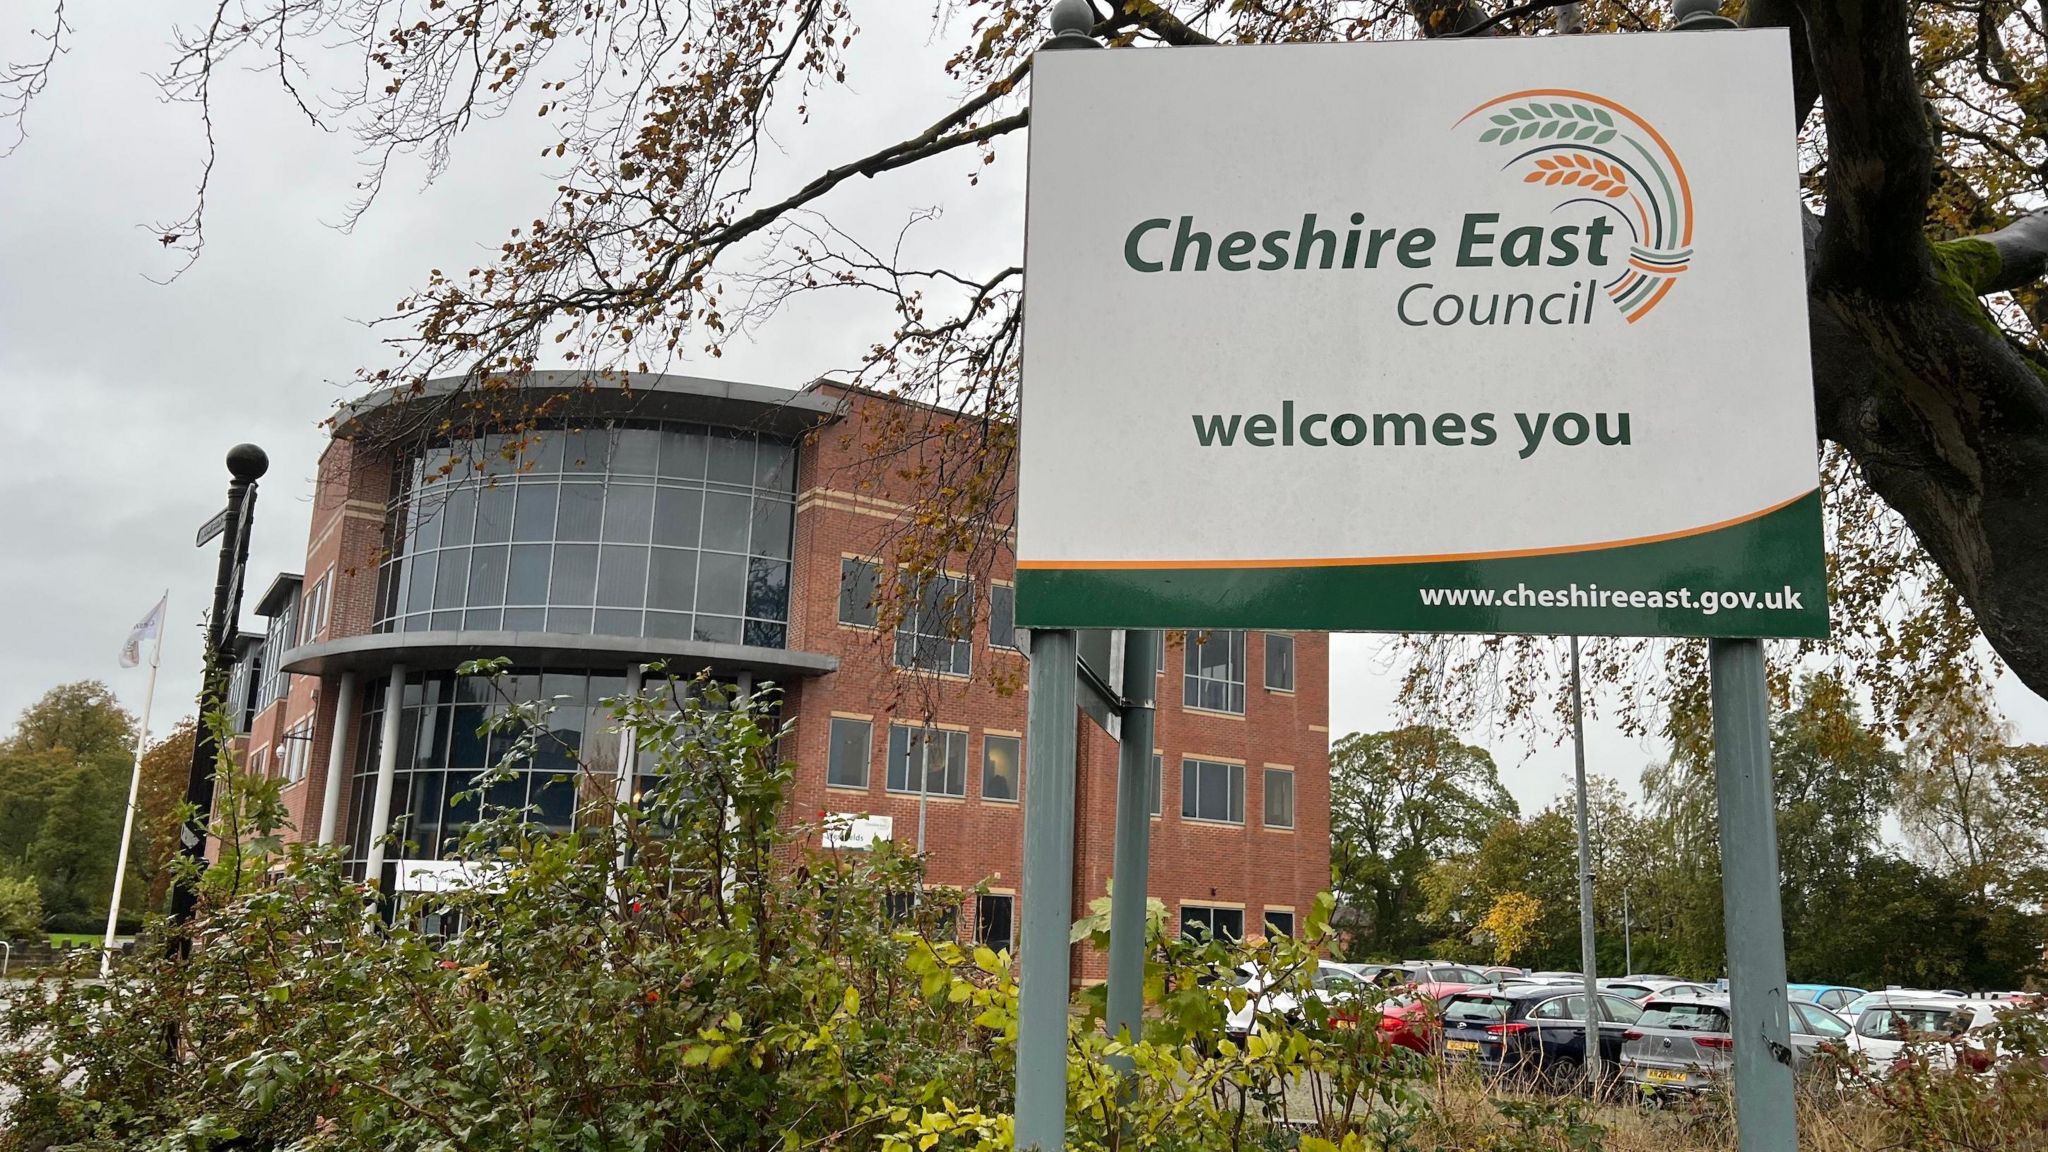 Cheshire East Council's headquarters in Sandbach, Cheshire